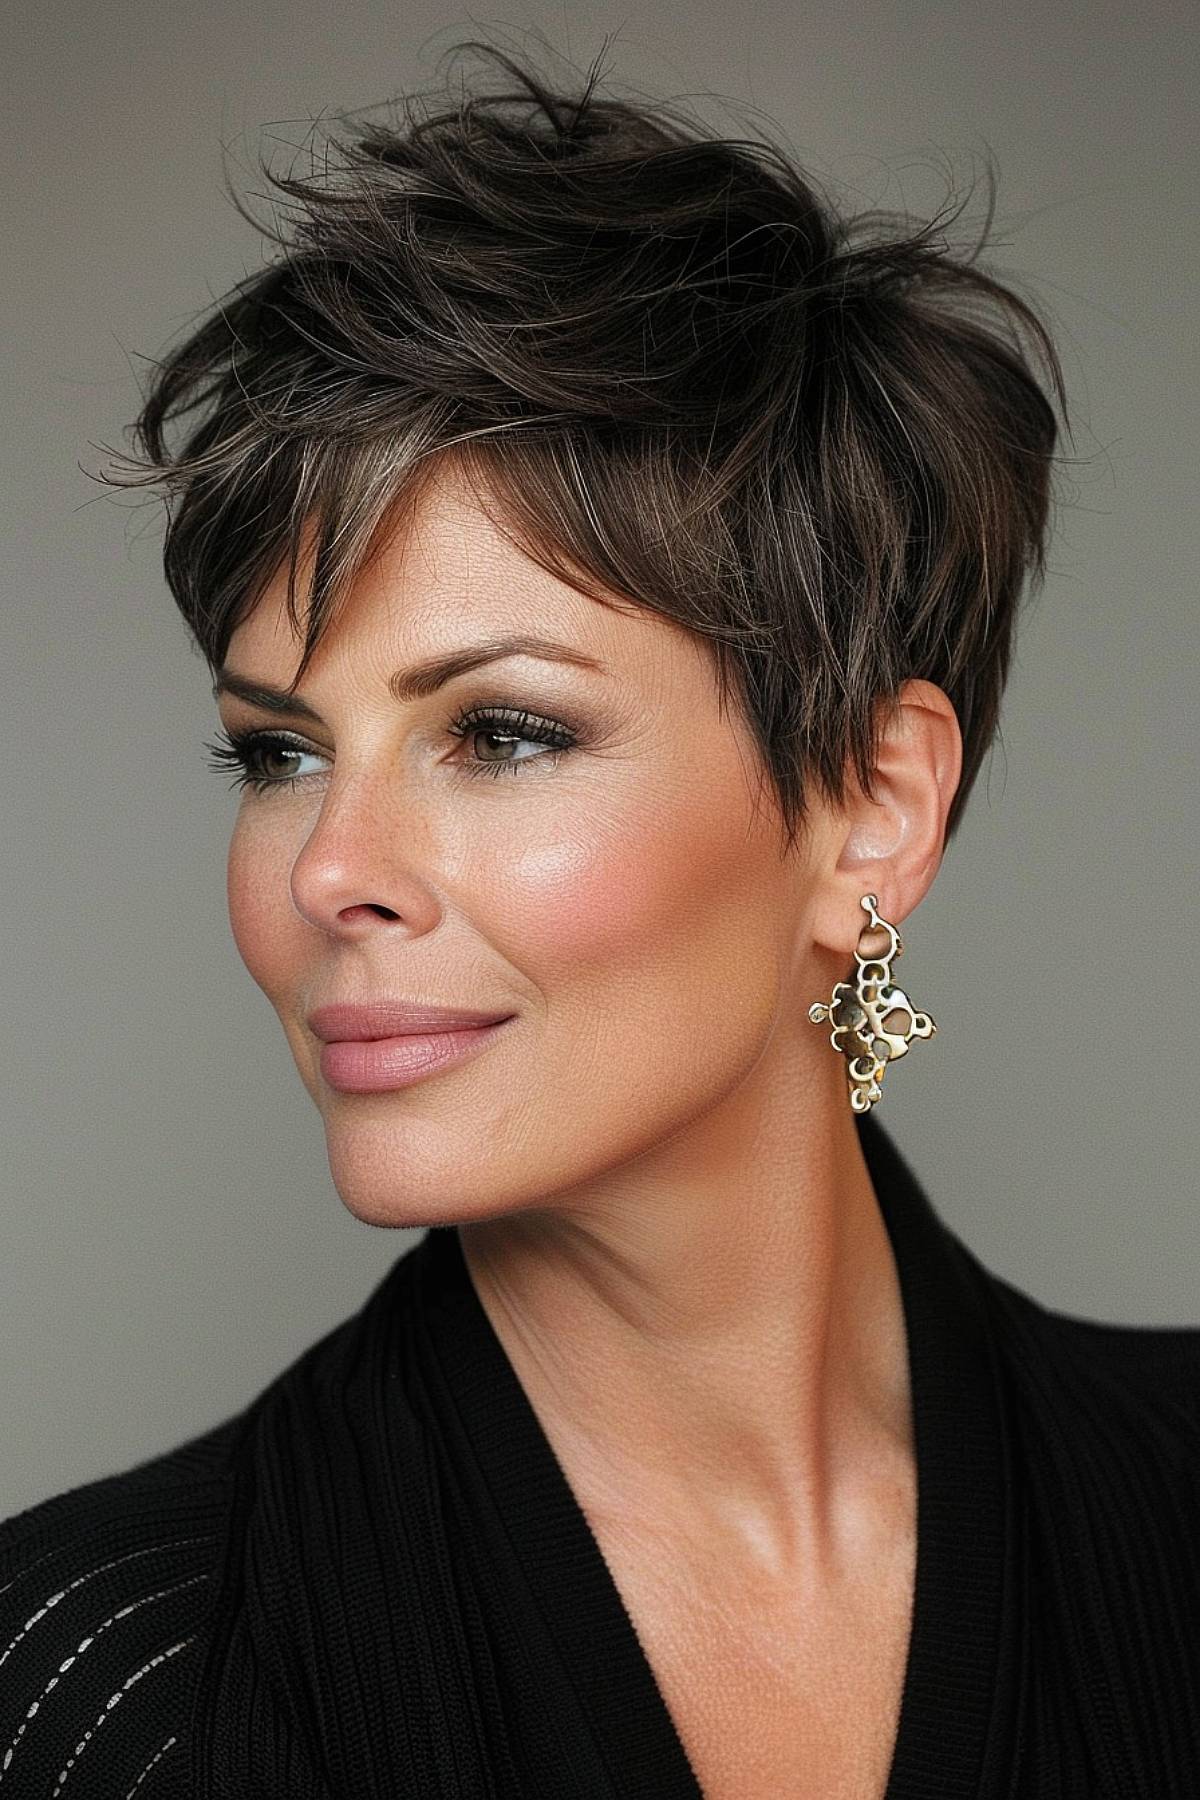 Perfect for women over 40, this elegantly angled pixie cut features sleek layers that create a sophisticated yet simple look.